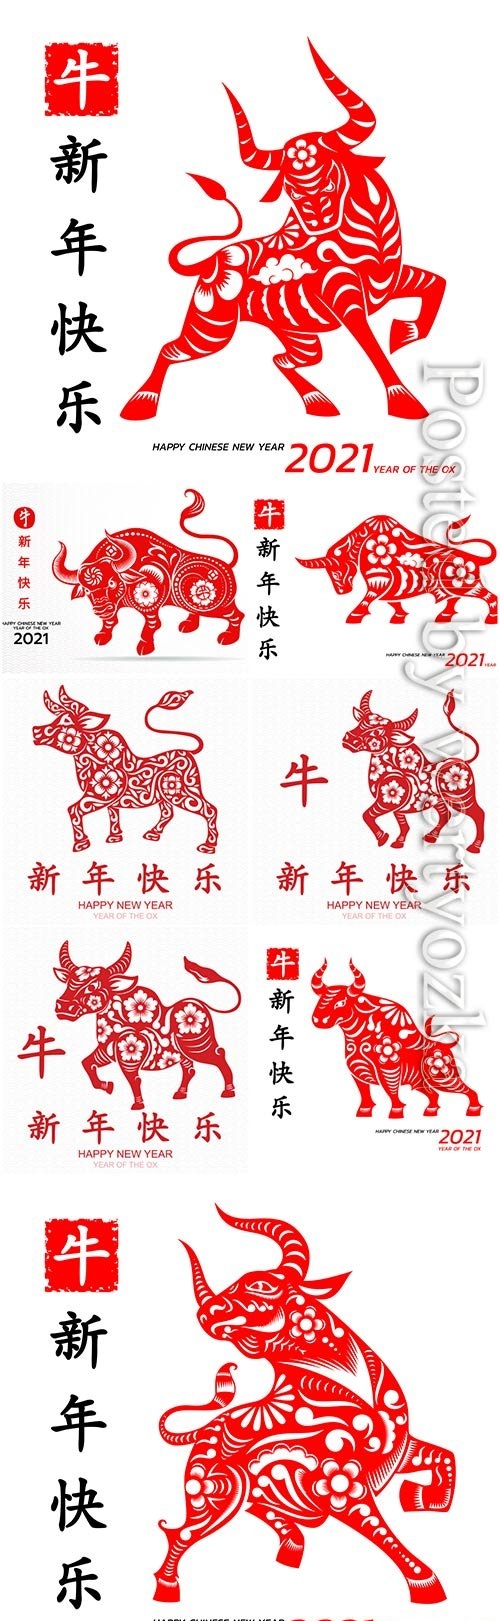 Happy chinese new year vector background 2021